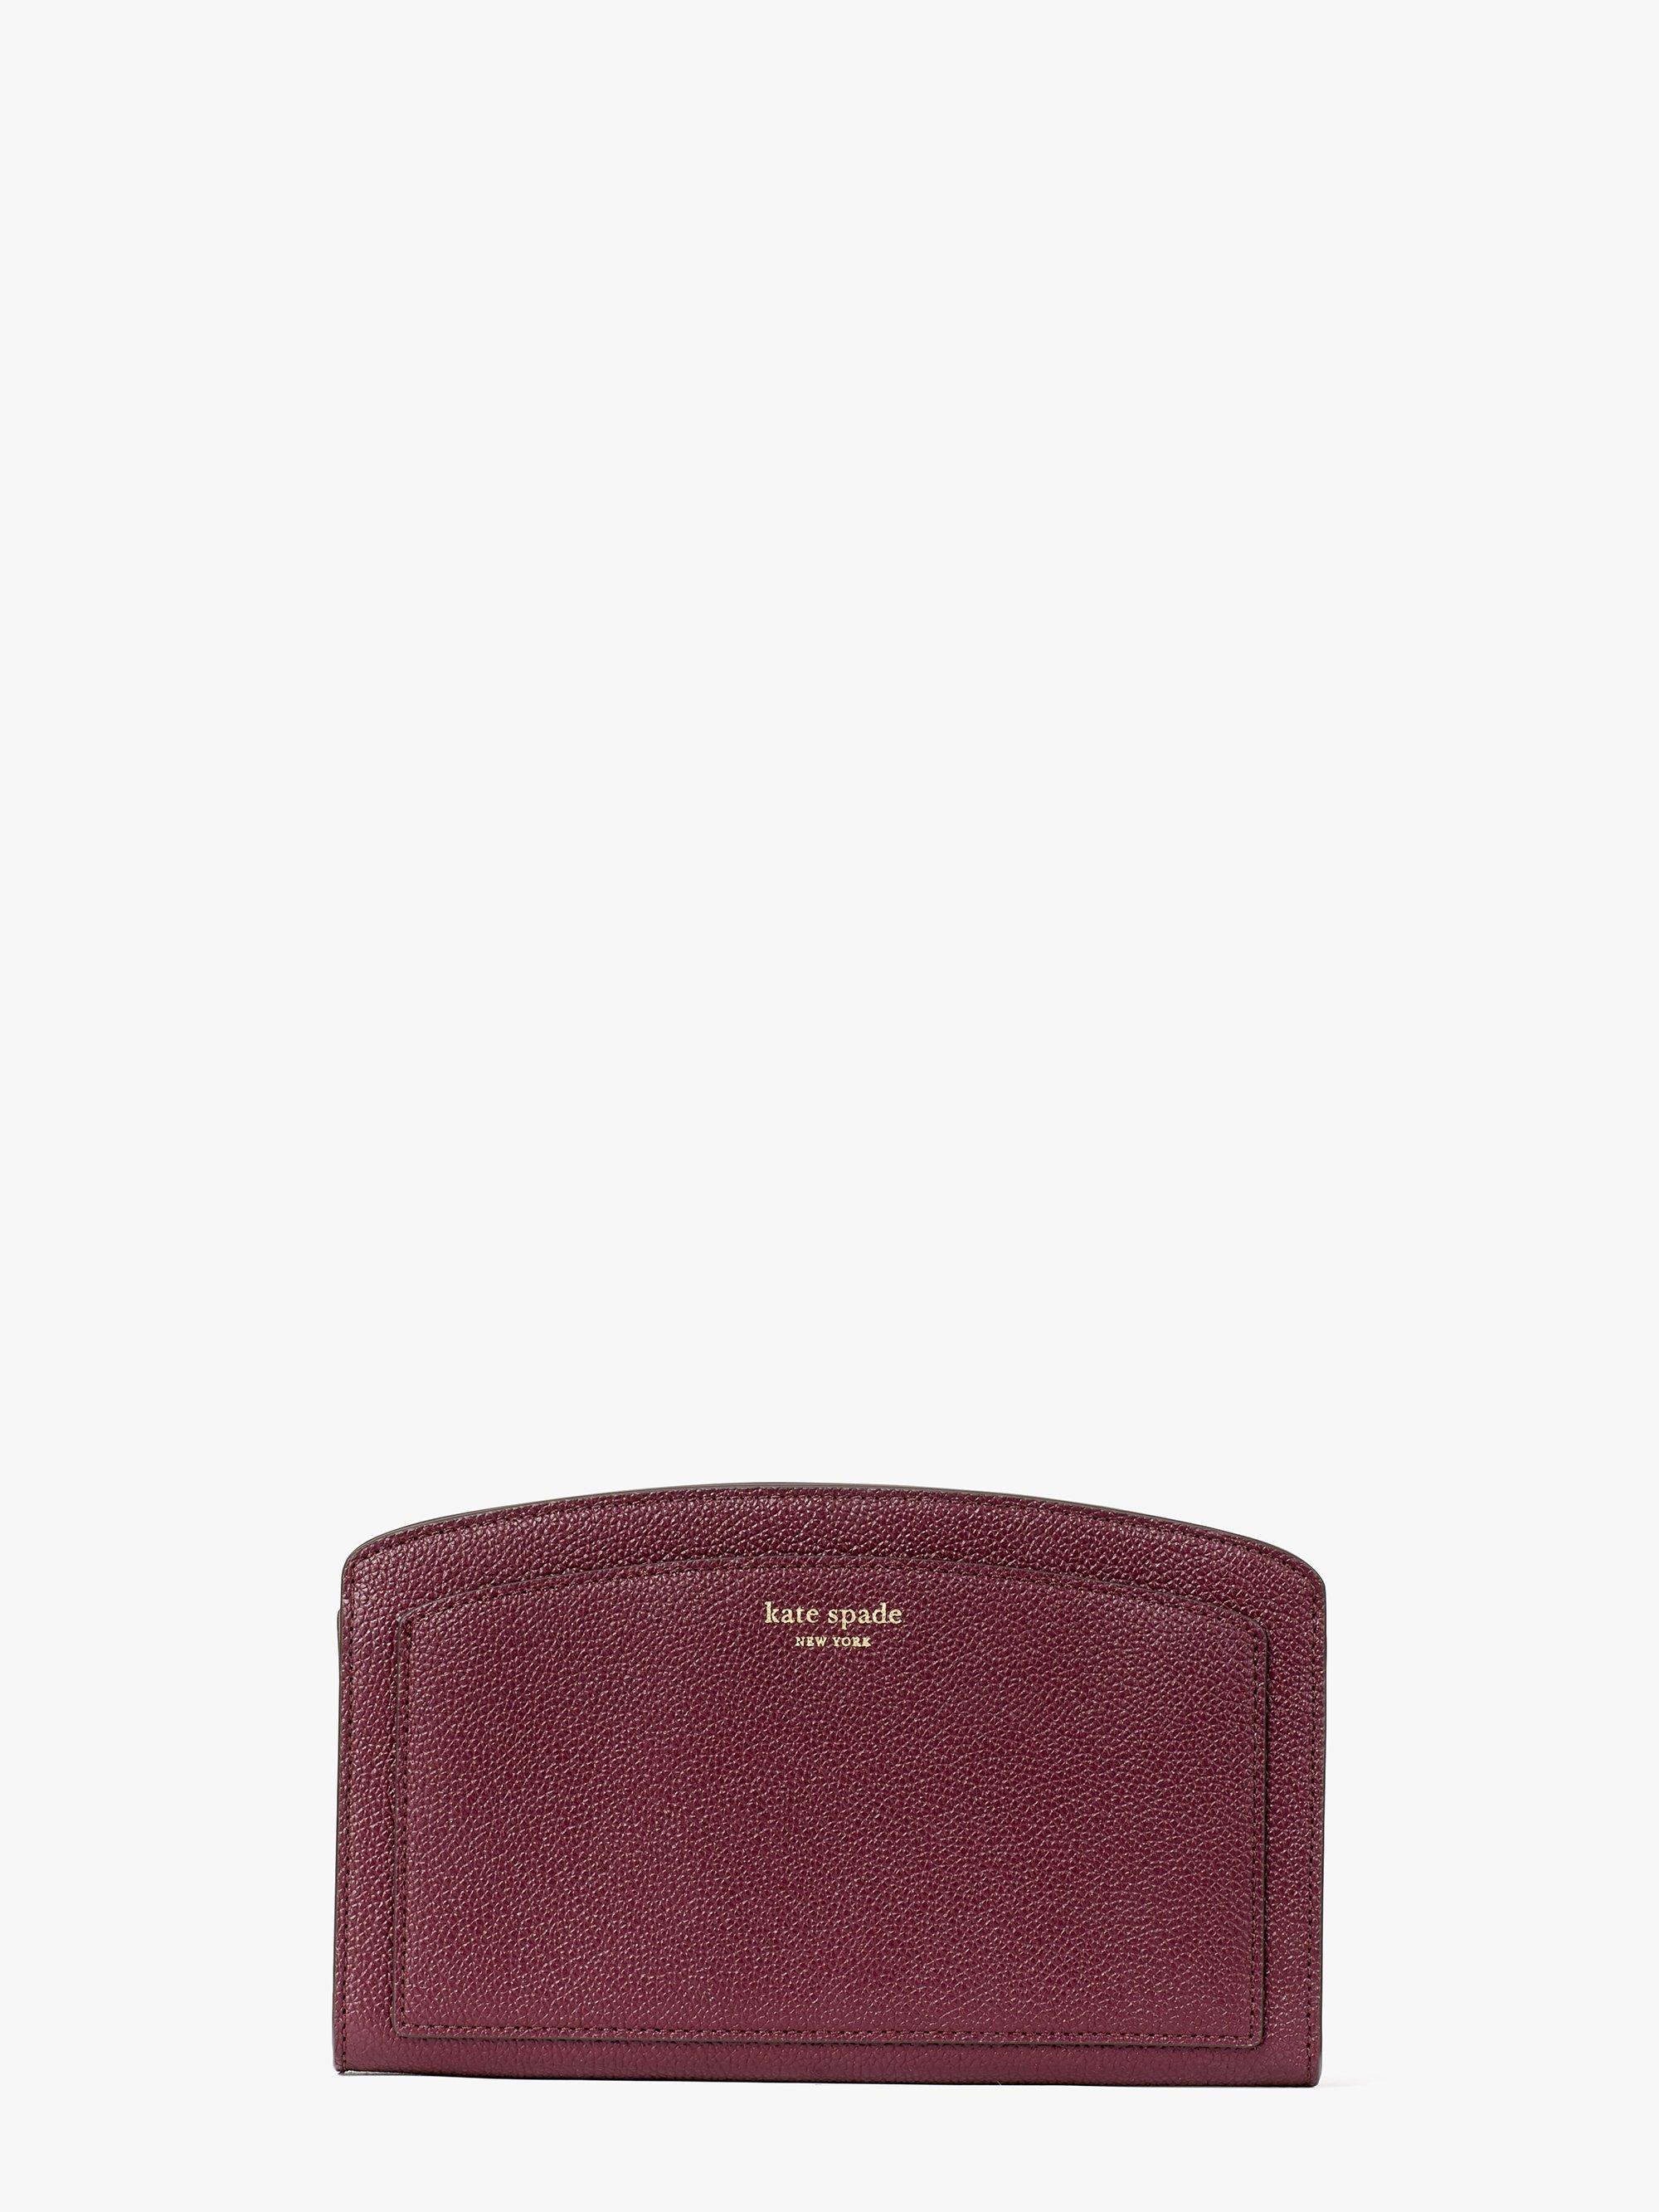 Kate Spade Leather Margaux East West Crossbody in Deep Cherry 